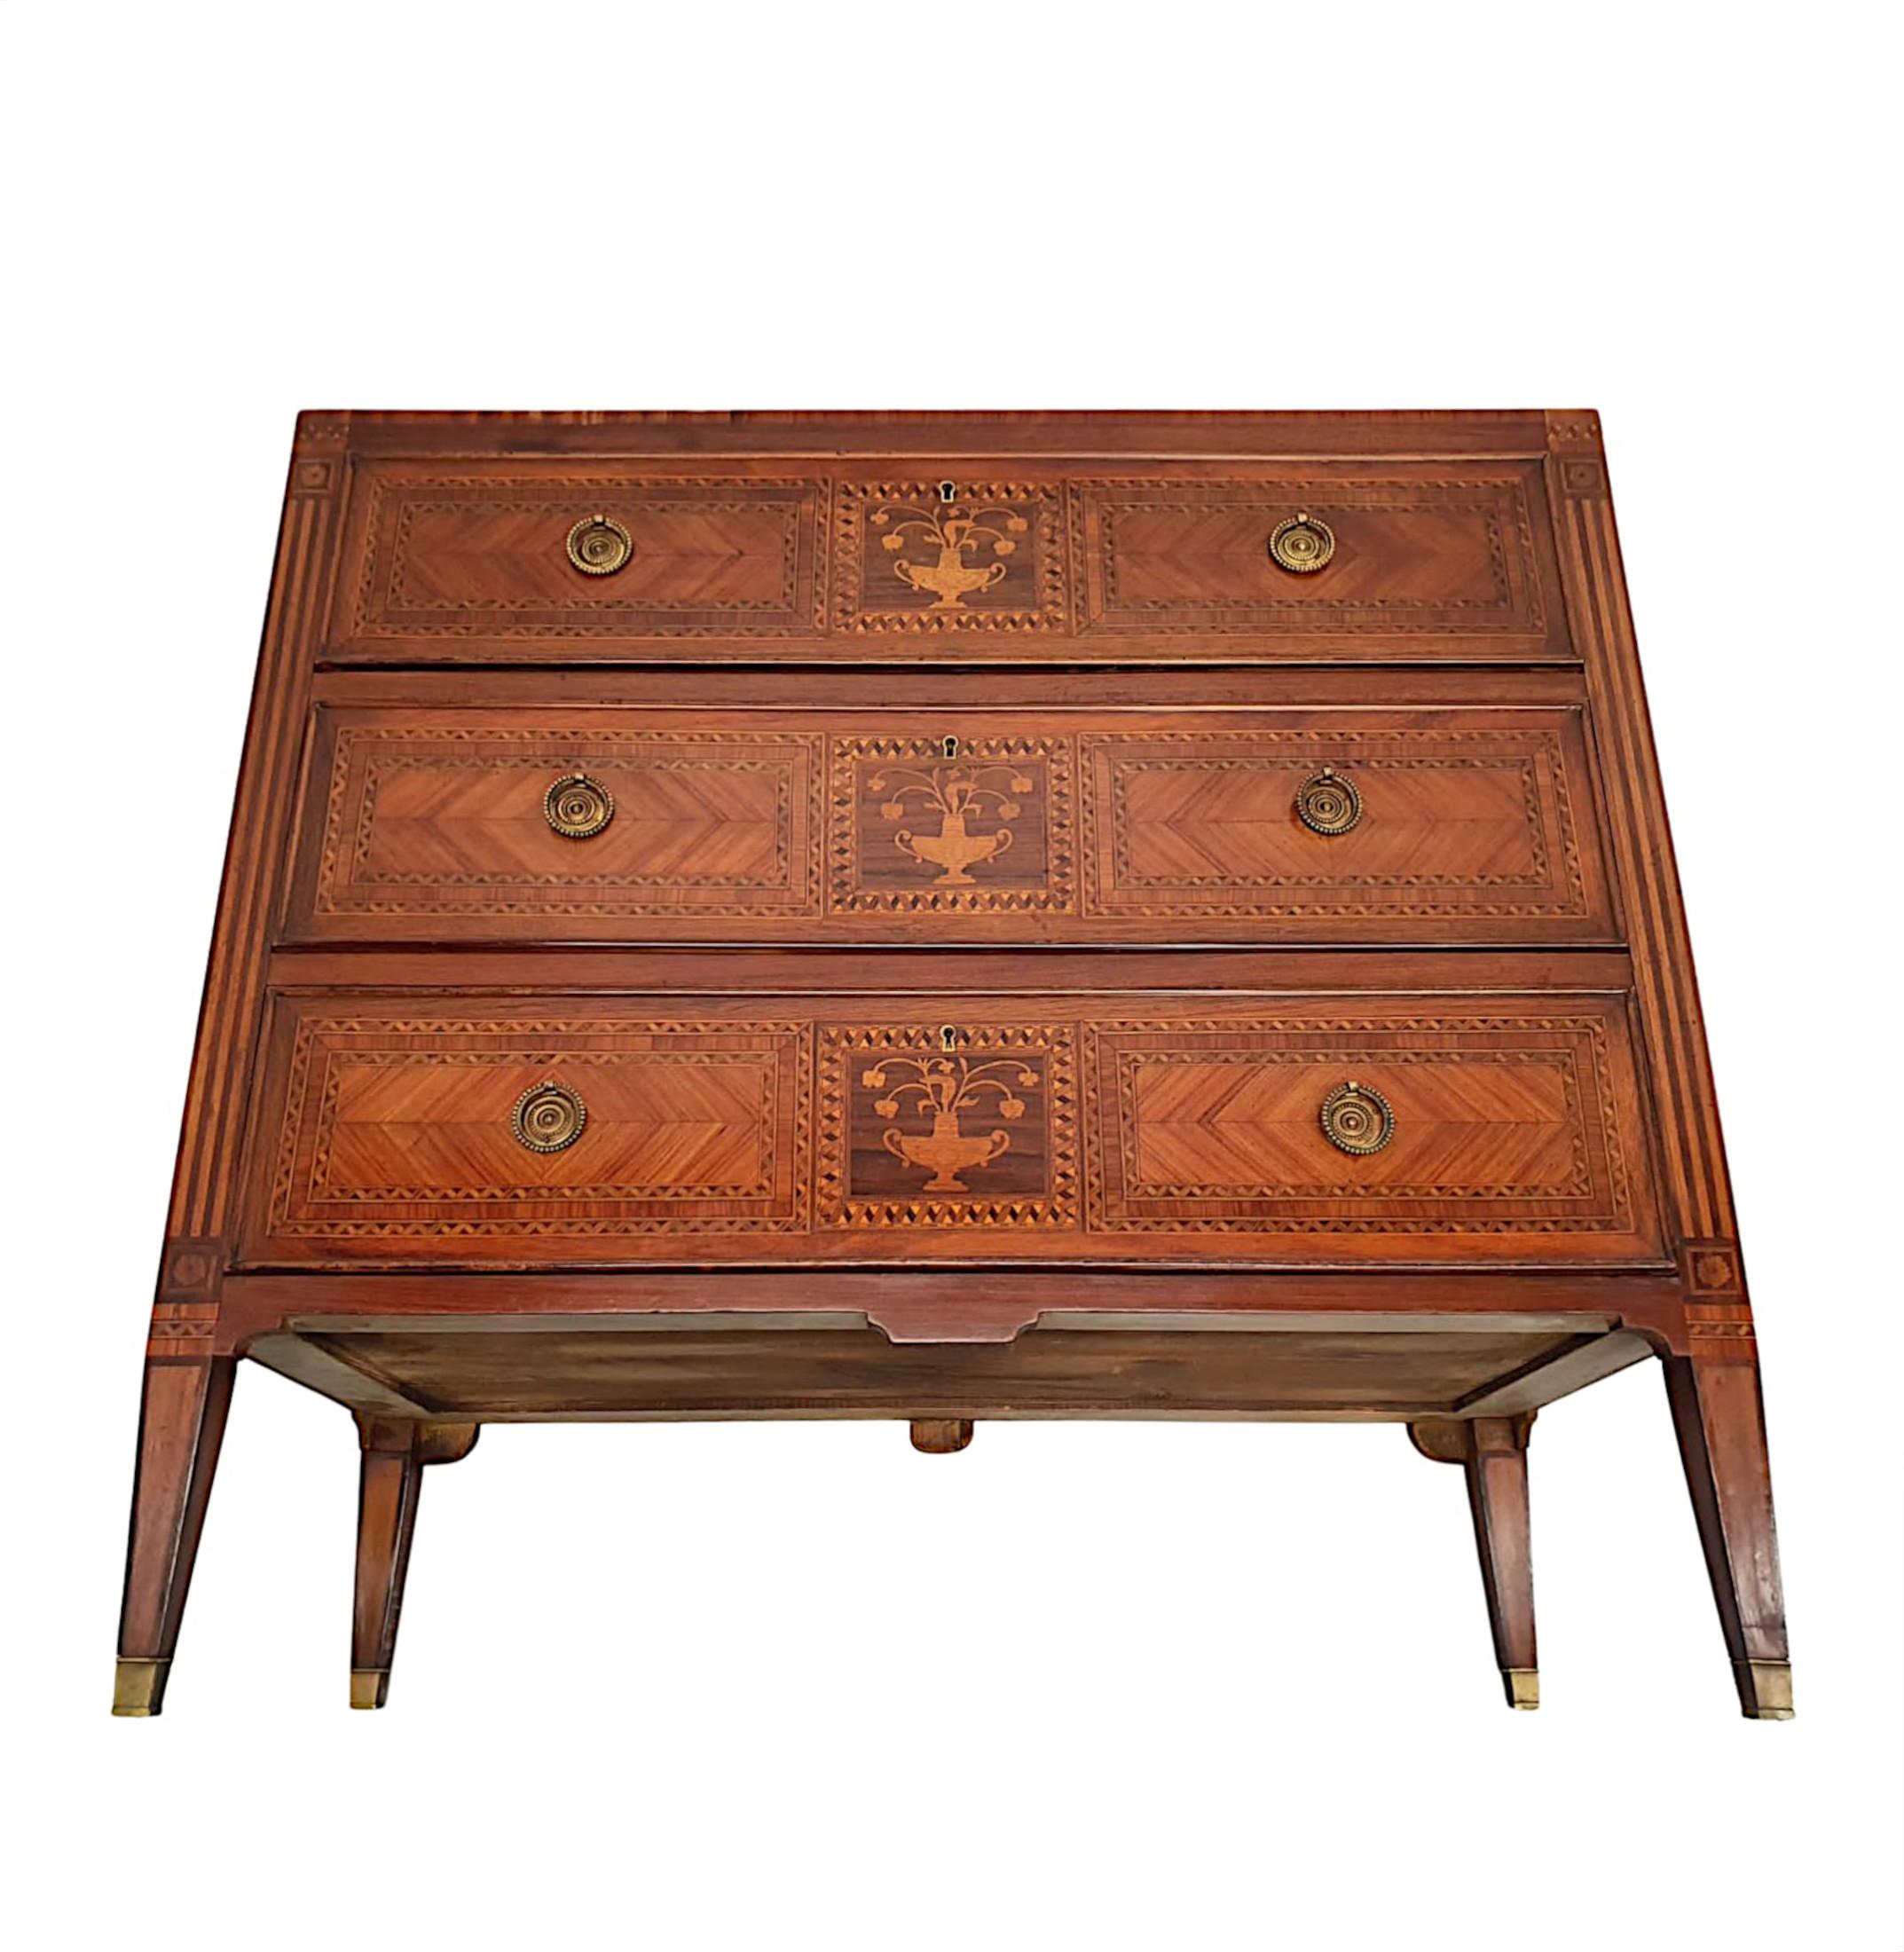 A Fine Early 20th Century Highly Inlaid Marble Top Chest of Drawers For Sale 2